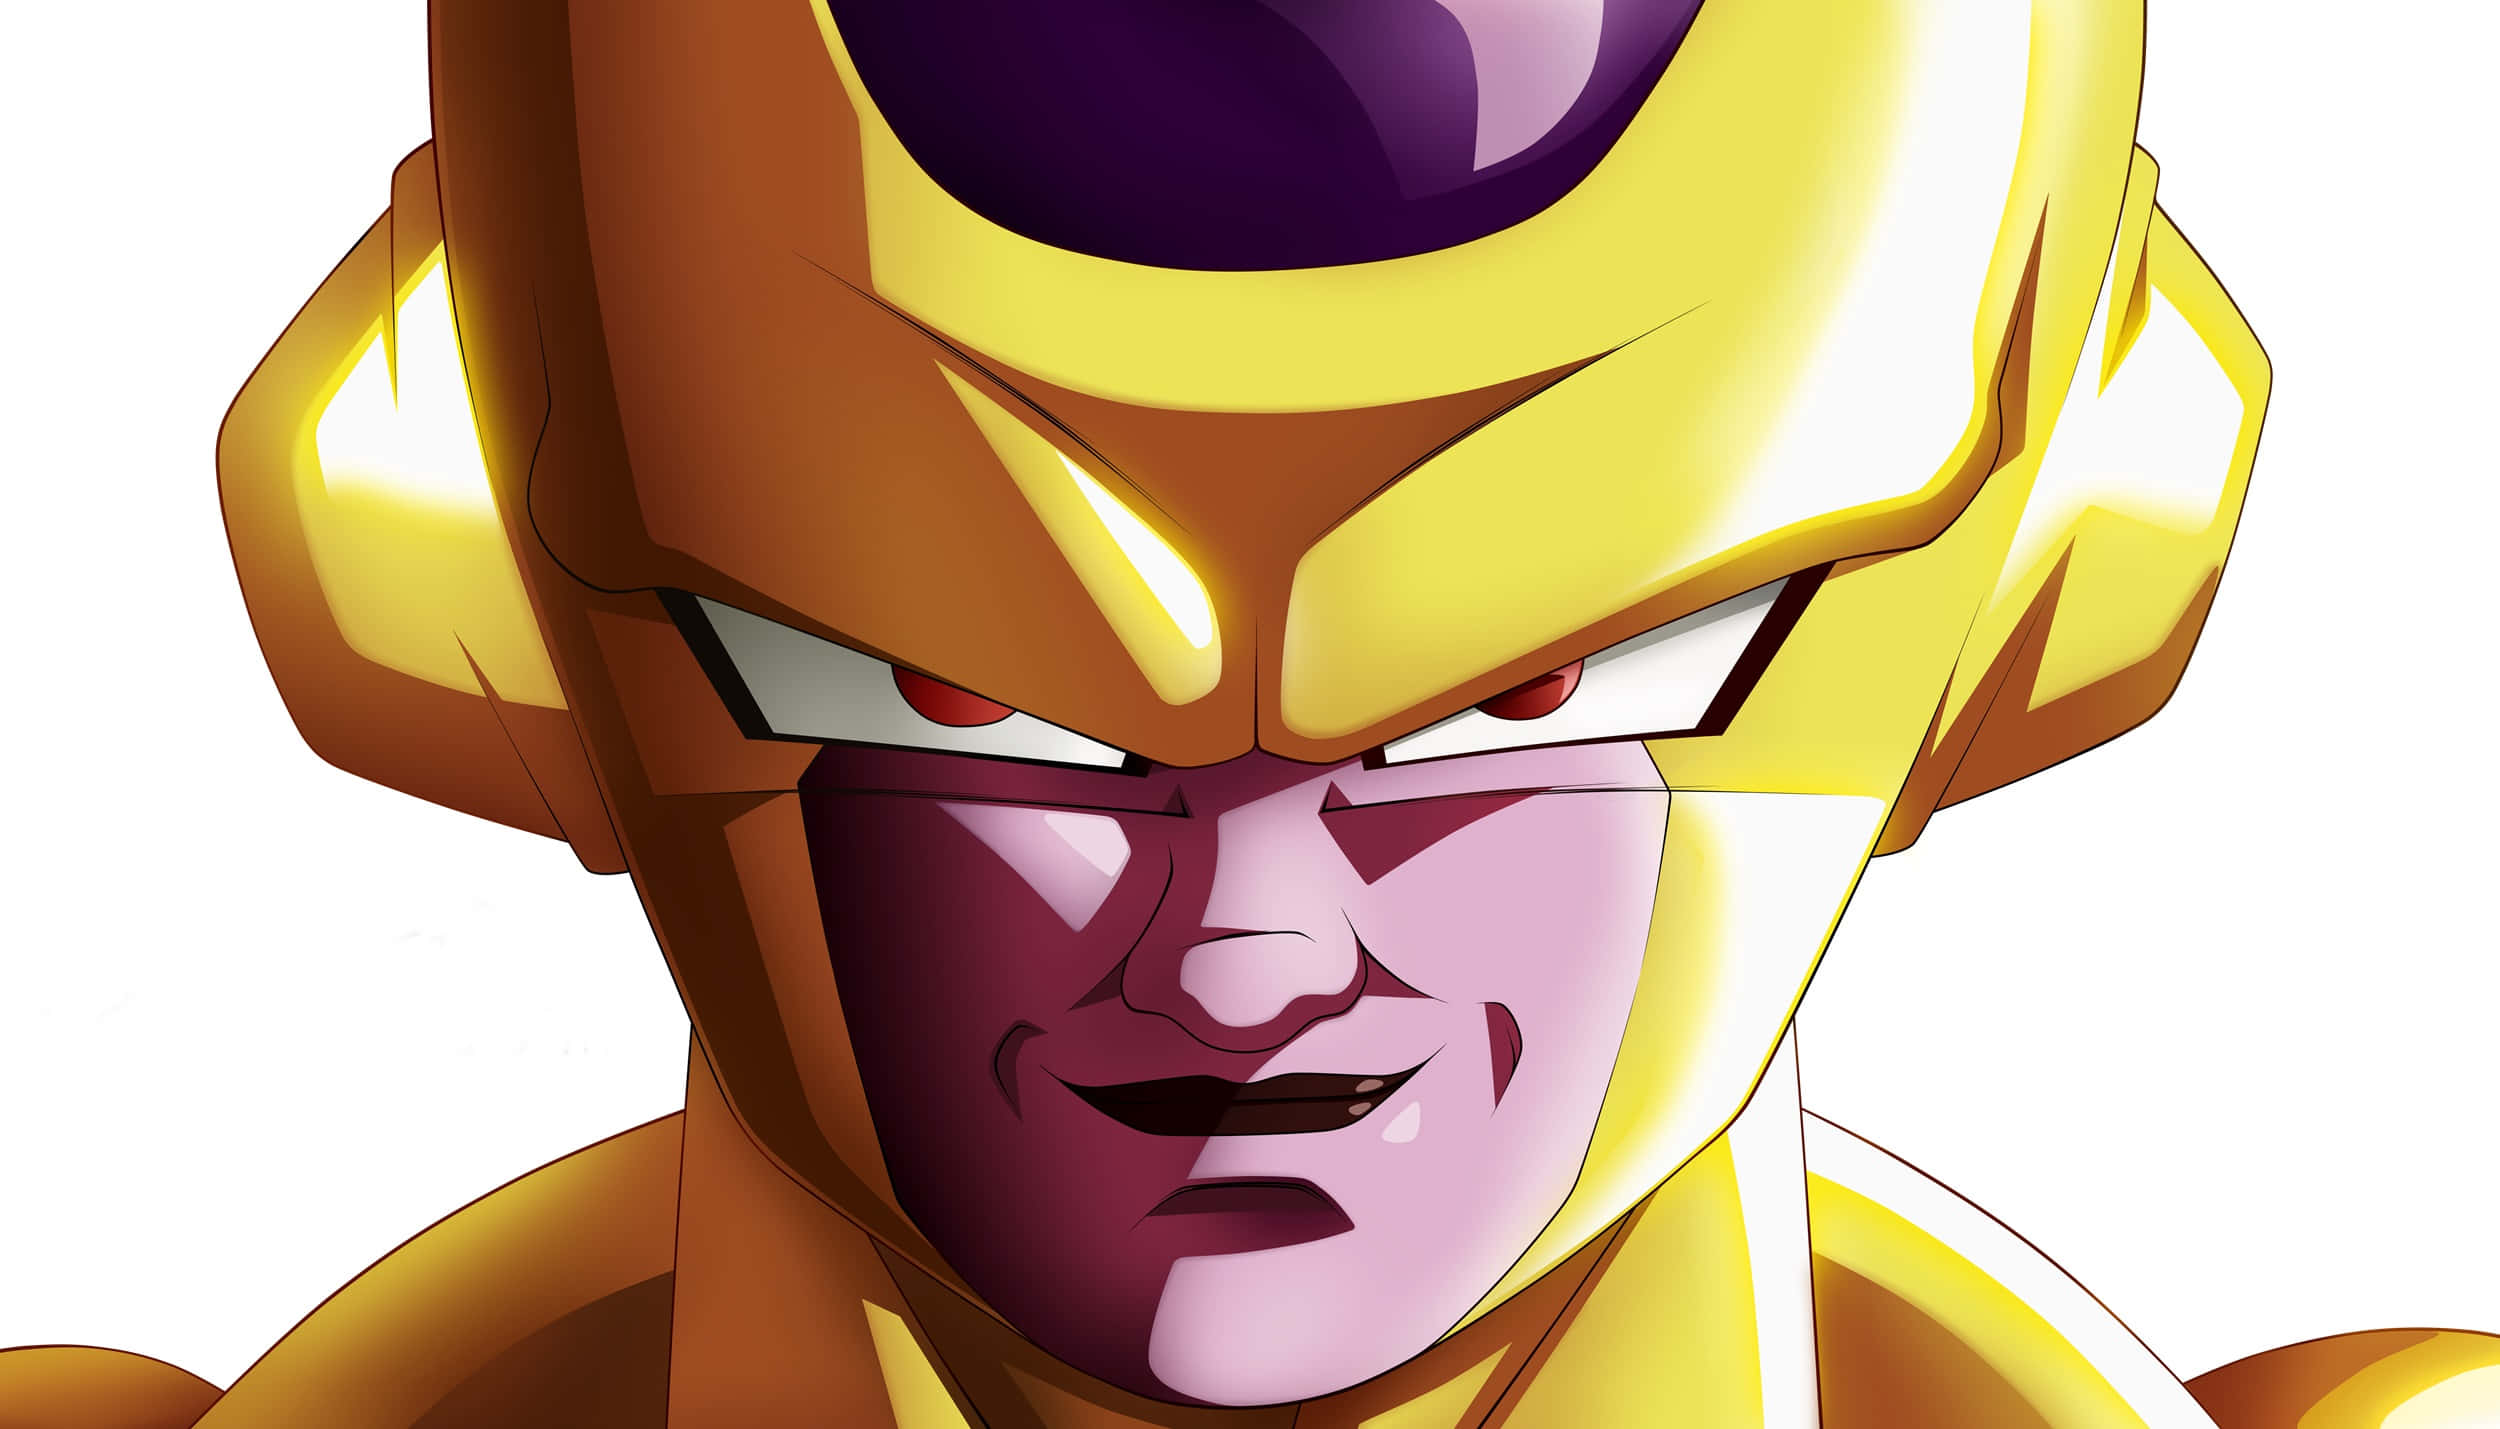 Download wallpapers Frieza, 4k, Dragon Ball, antagonist, 3D art, Dragon  Ball characters, DBZ, Dragon Ball Z, Frieza Dragon Ball for desktop free.  Pictures for desktop free